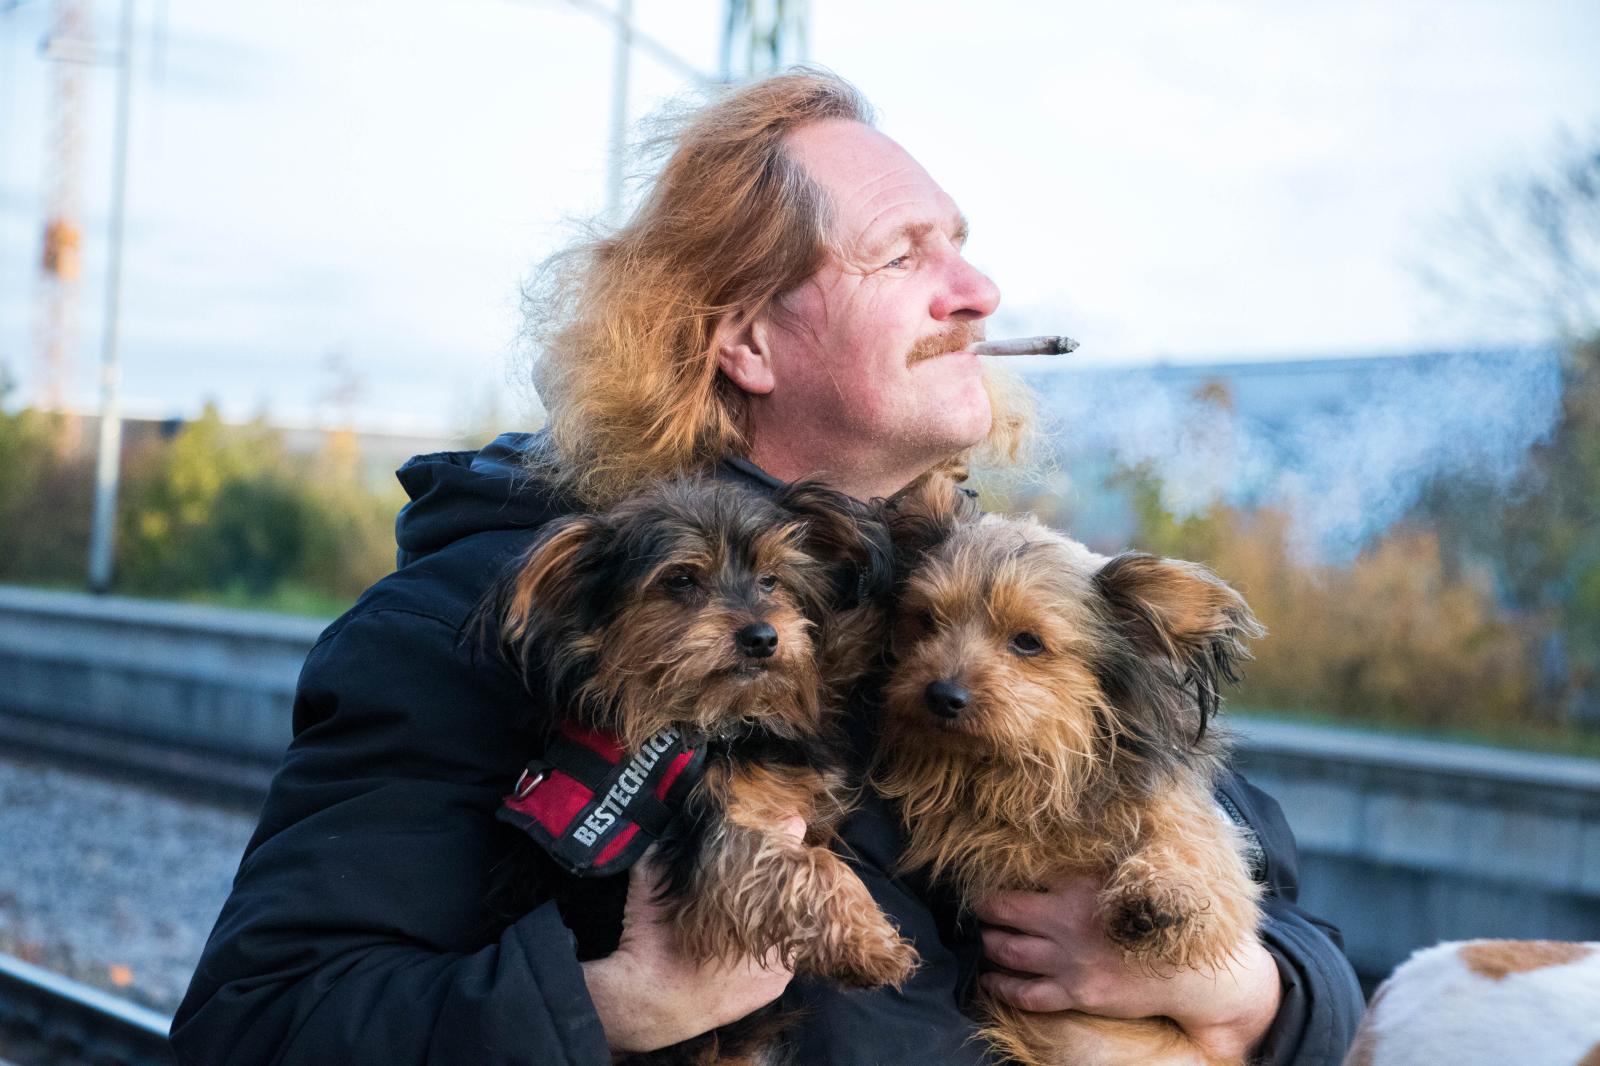 Portraits - Holger and the doggos, Hannover (2019).